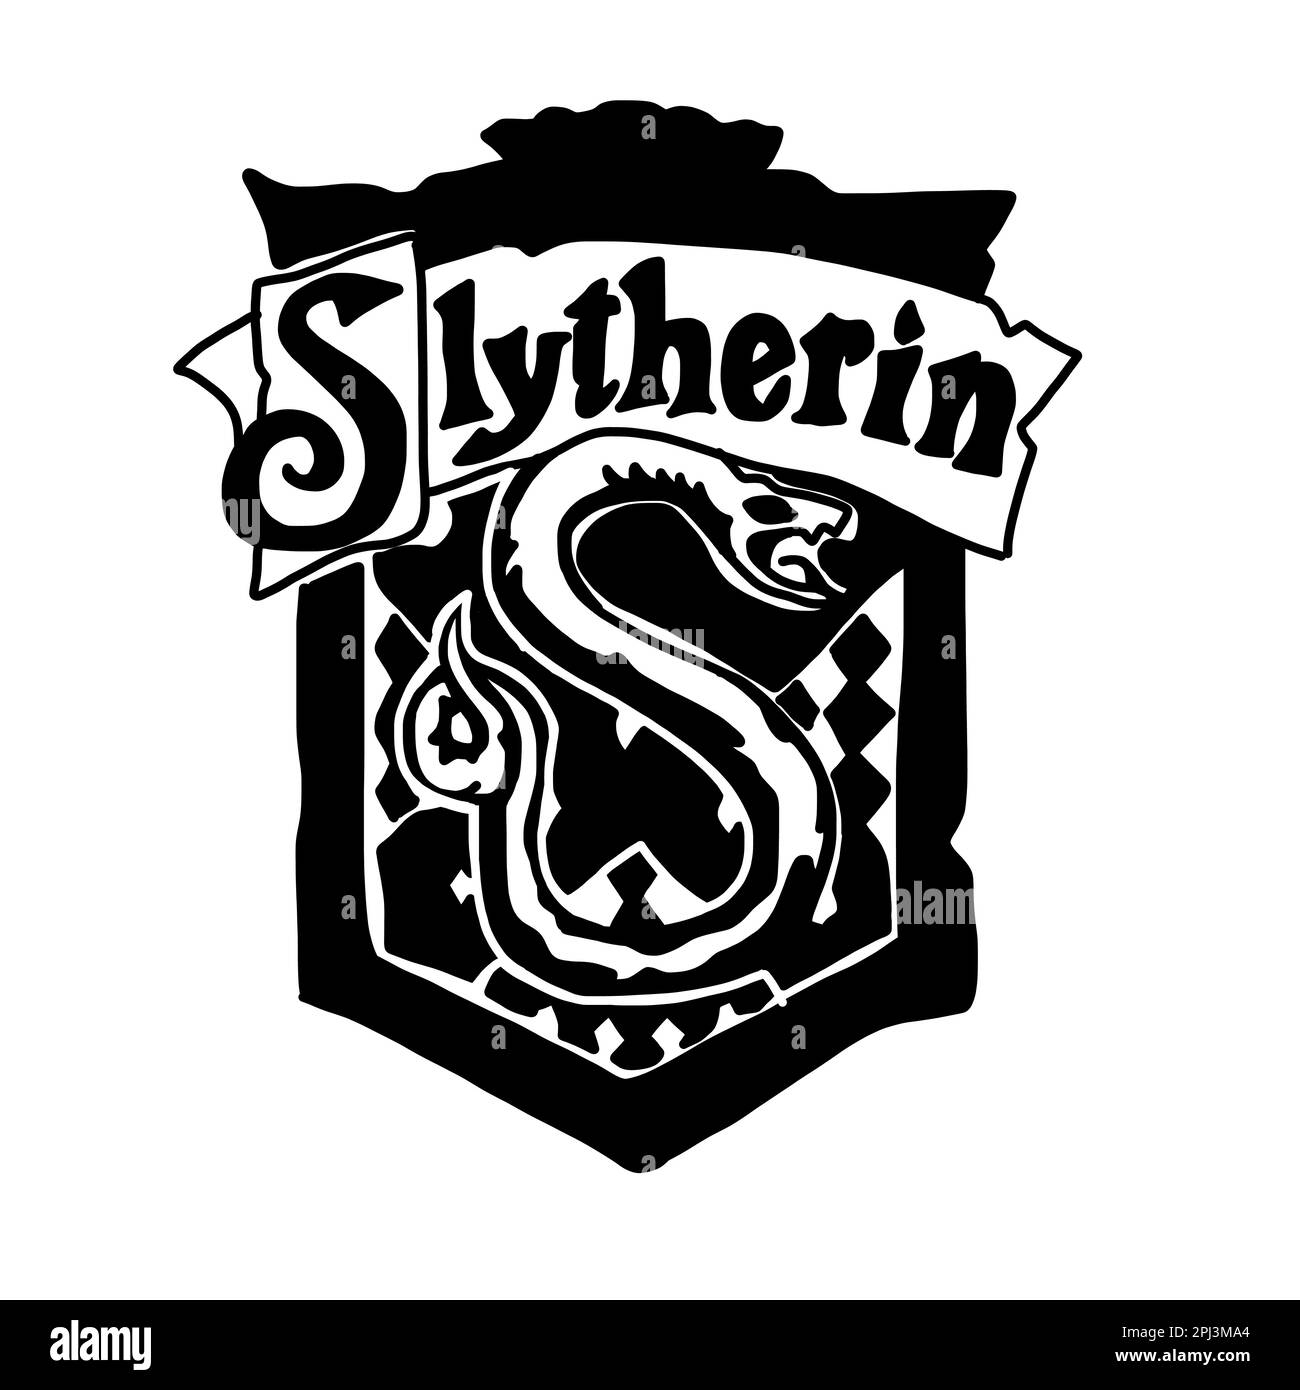 Harry Potter Slytherin logo in cartoon doodle style. Vector illustration isolated on white background. Stock Vector